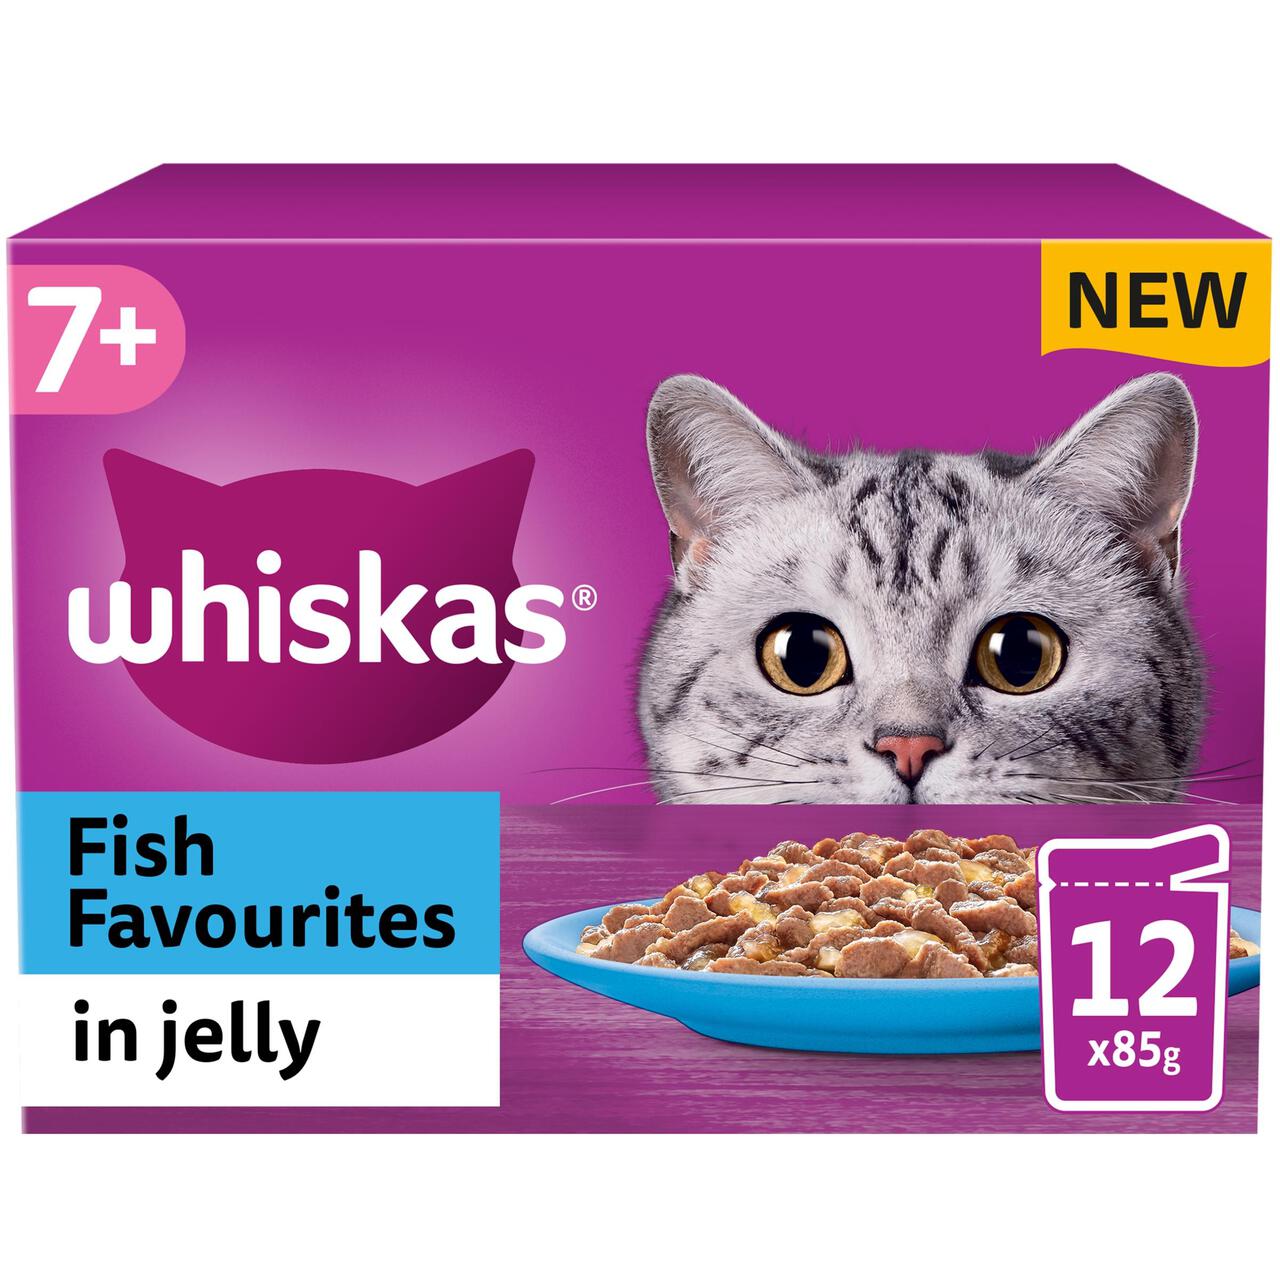 Whiskas 7+ Senior Wet Cat Food Fish Favourites in Jelly 12 x 85g